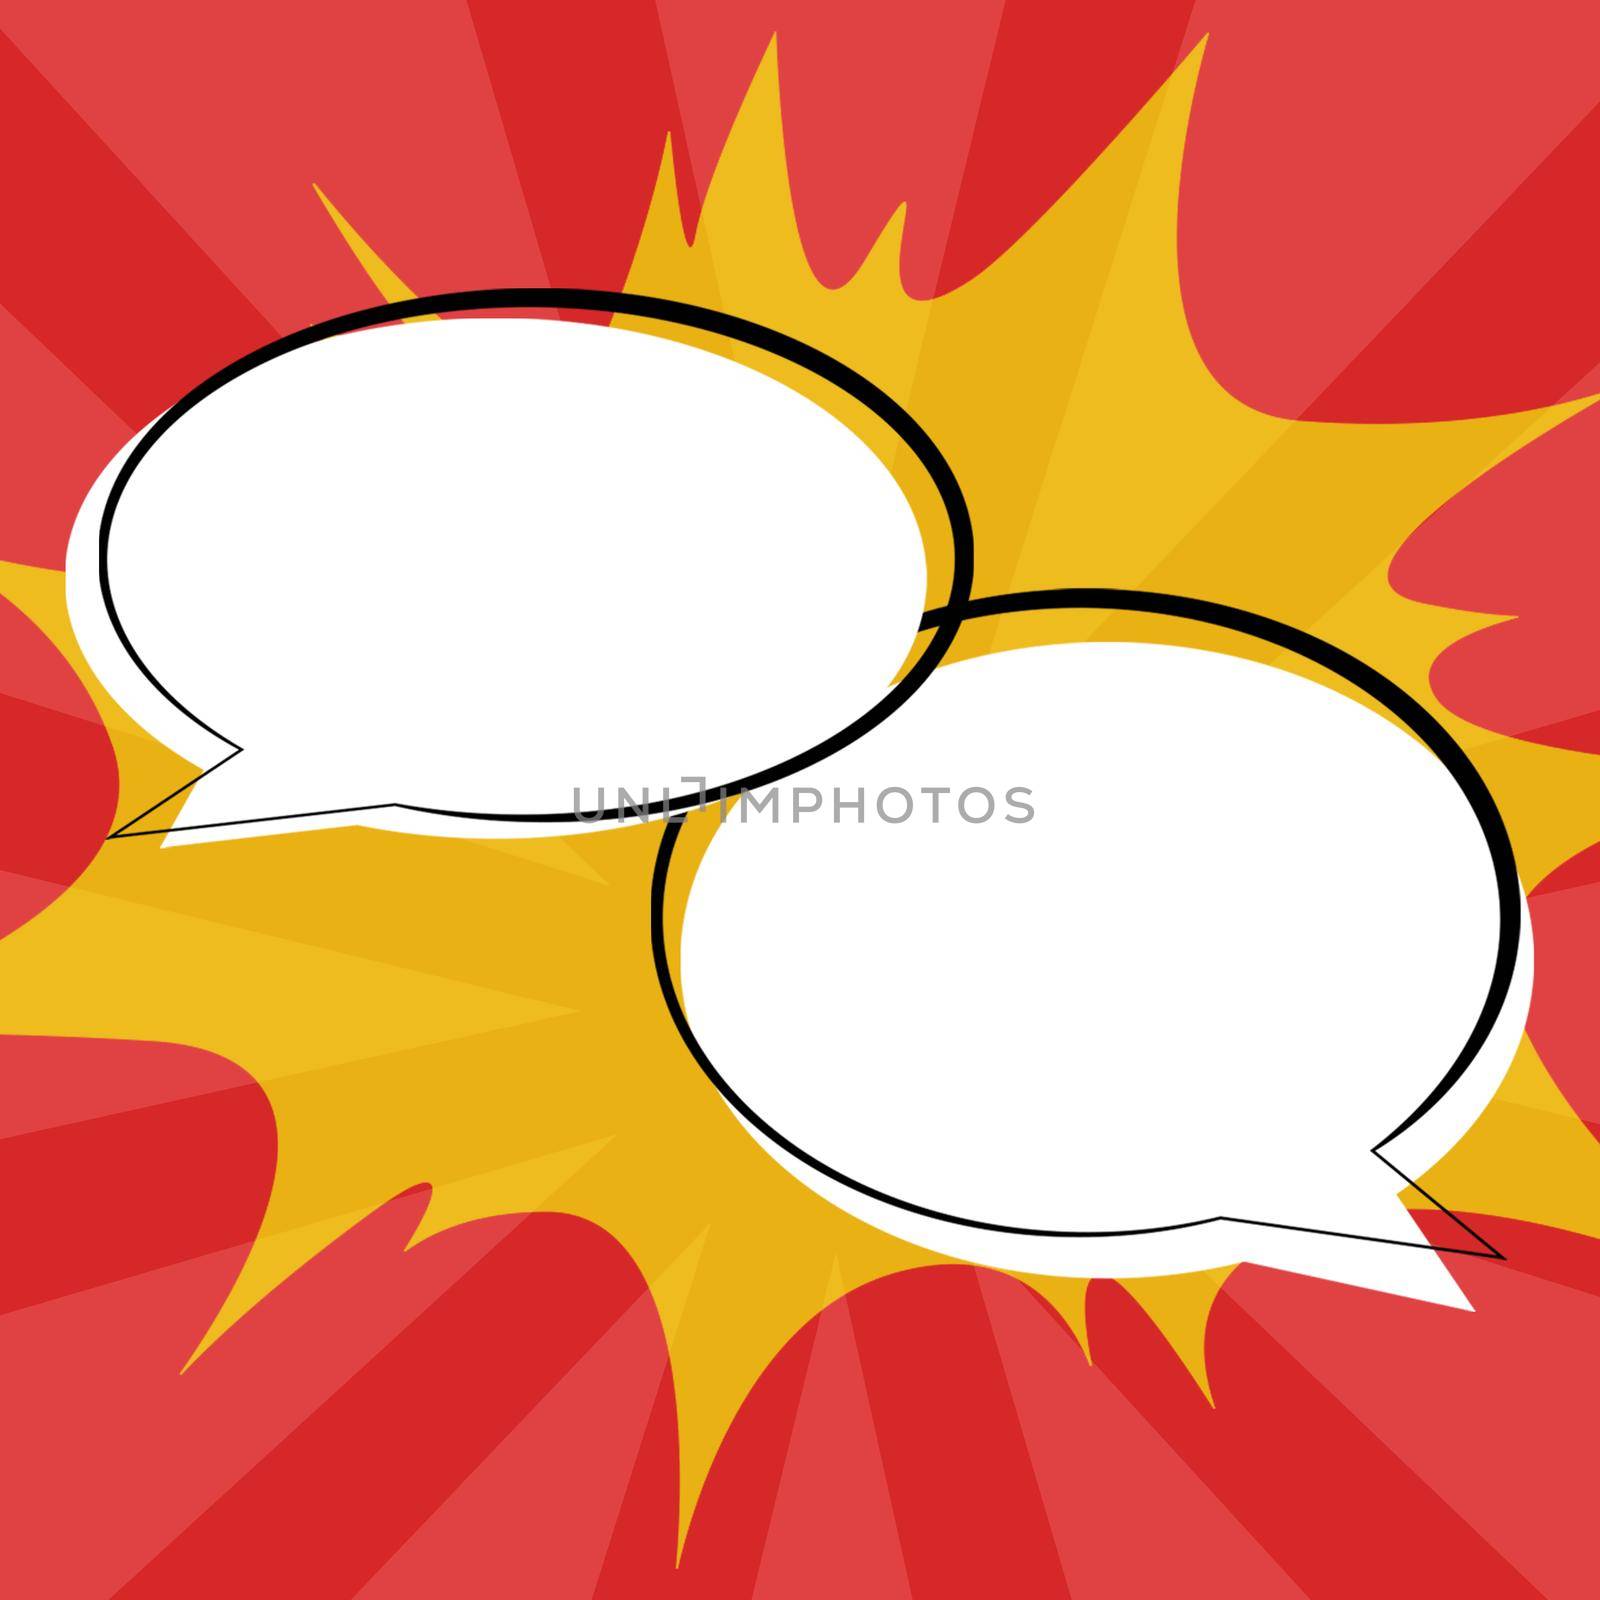 Pair Of Speech Bubbles In Oval Shape With Copy Space On Explosive Frame Background Design. Empty Communication S Representing Exchanging Of Ideas And Opinions. by nialowwa